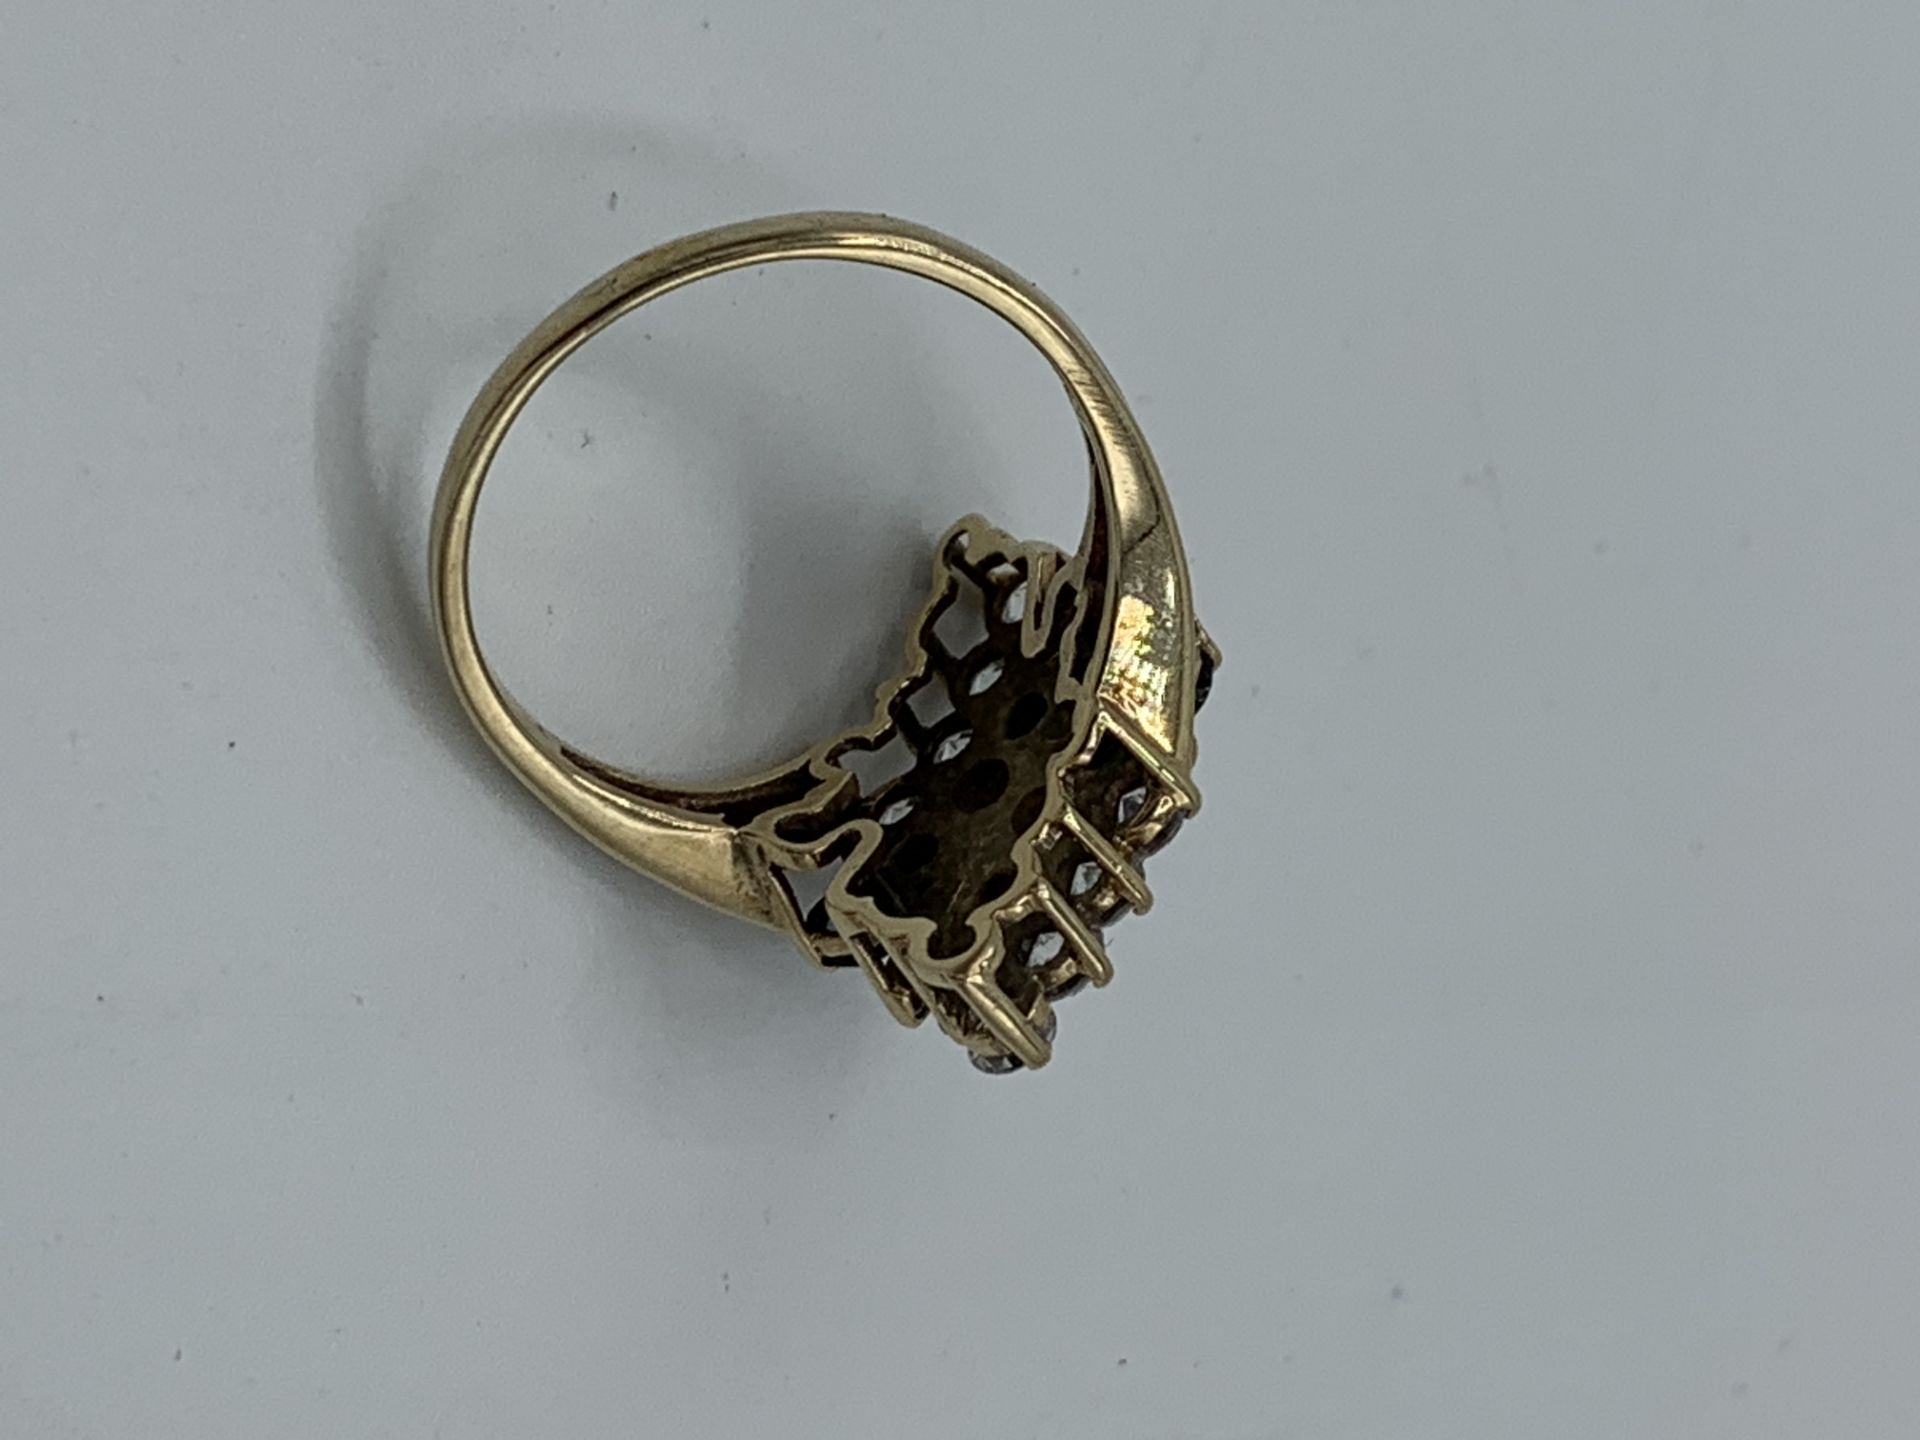 9ct gold ring set with blue and white stones, size P, weight 3.6gms. Estimate £150-180. - Image 3 of 3